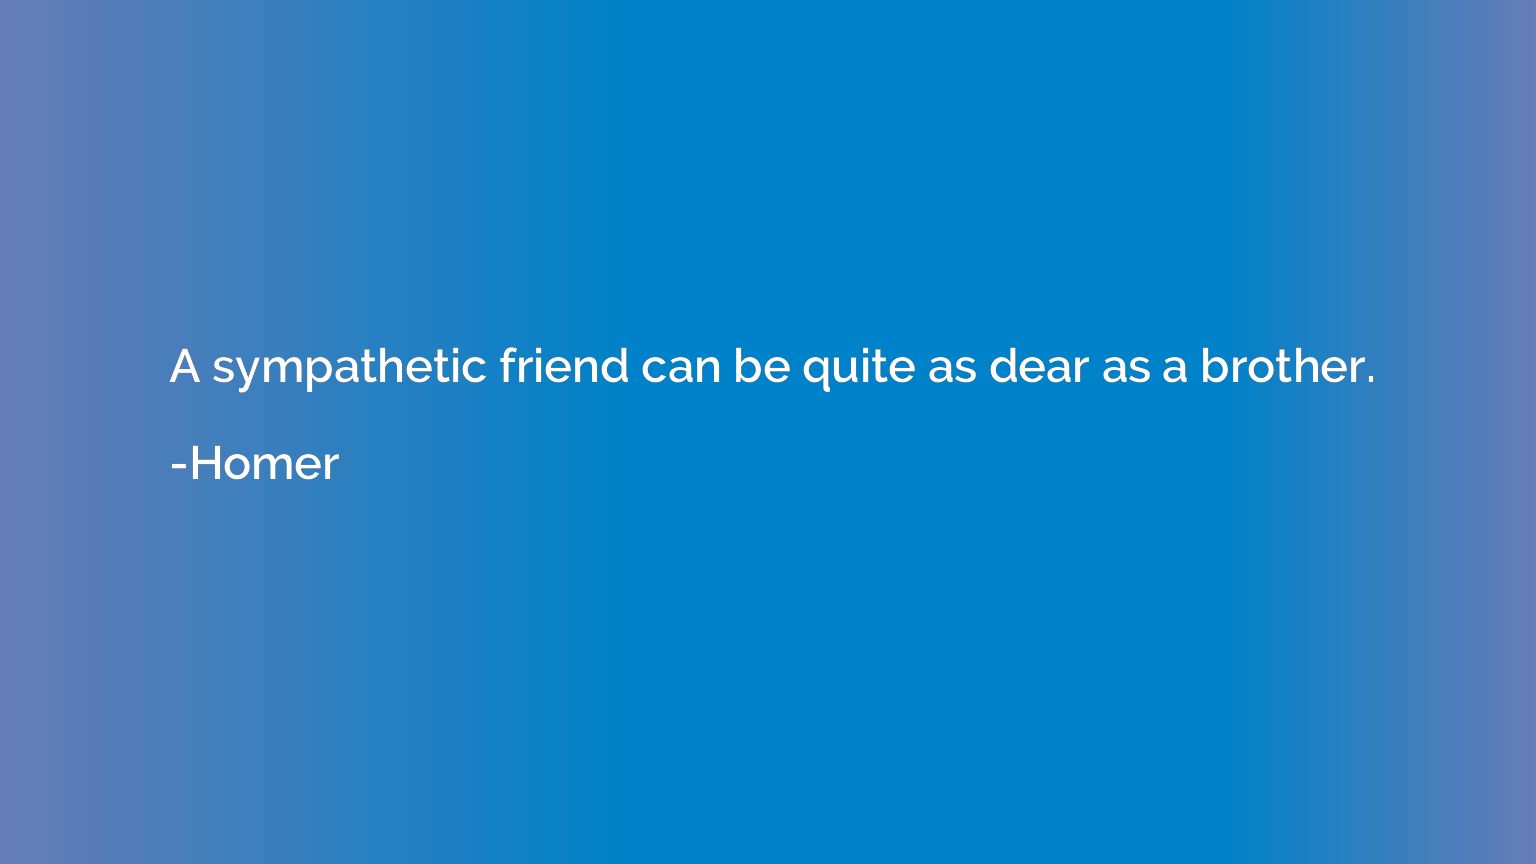 A sympathetic friend can be quite as dear as a brother.